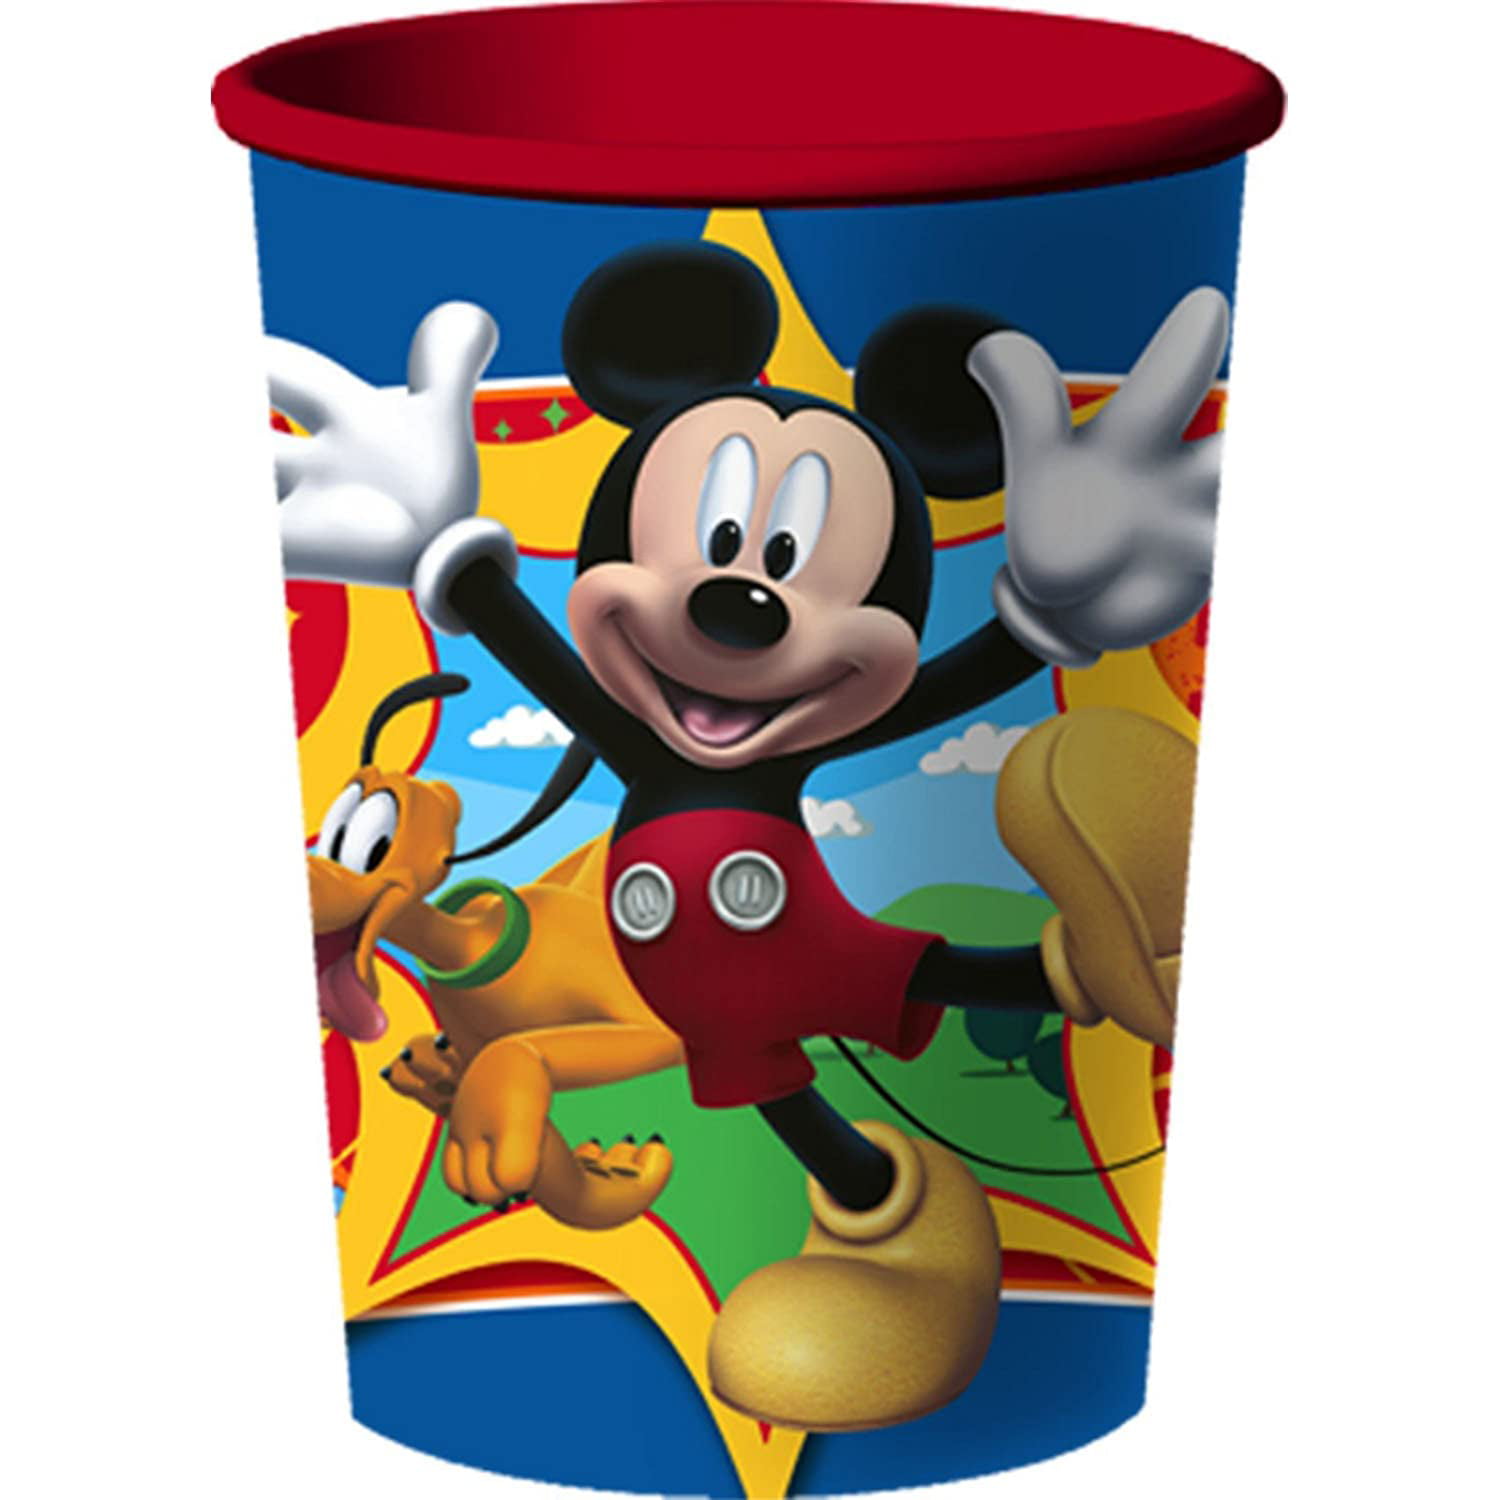 Disney Mickey Mouse Plastic 16 oz Cups, 8 Count, Size: 16 fl oz